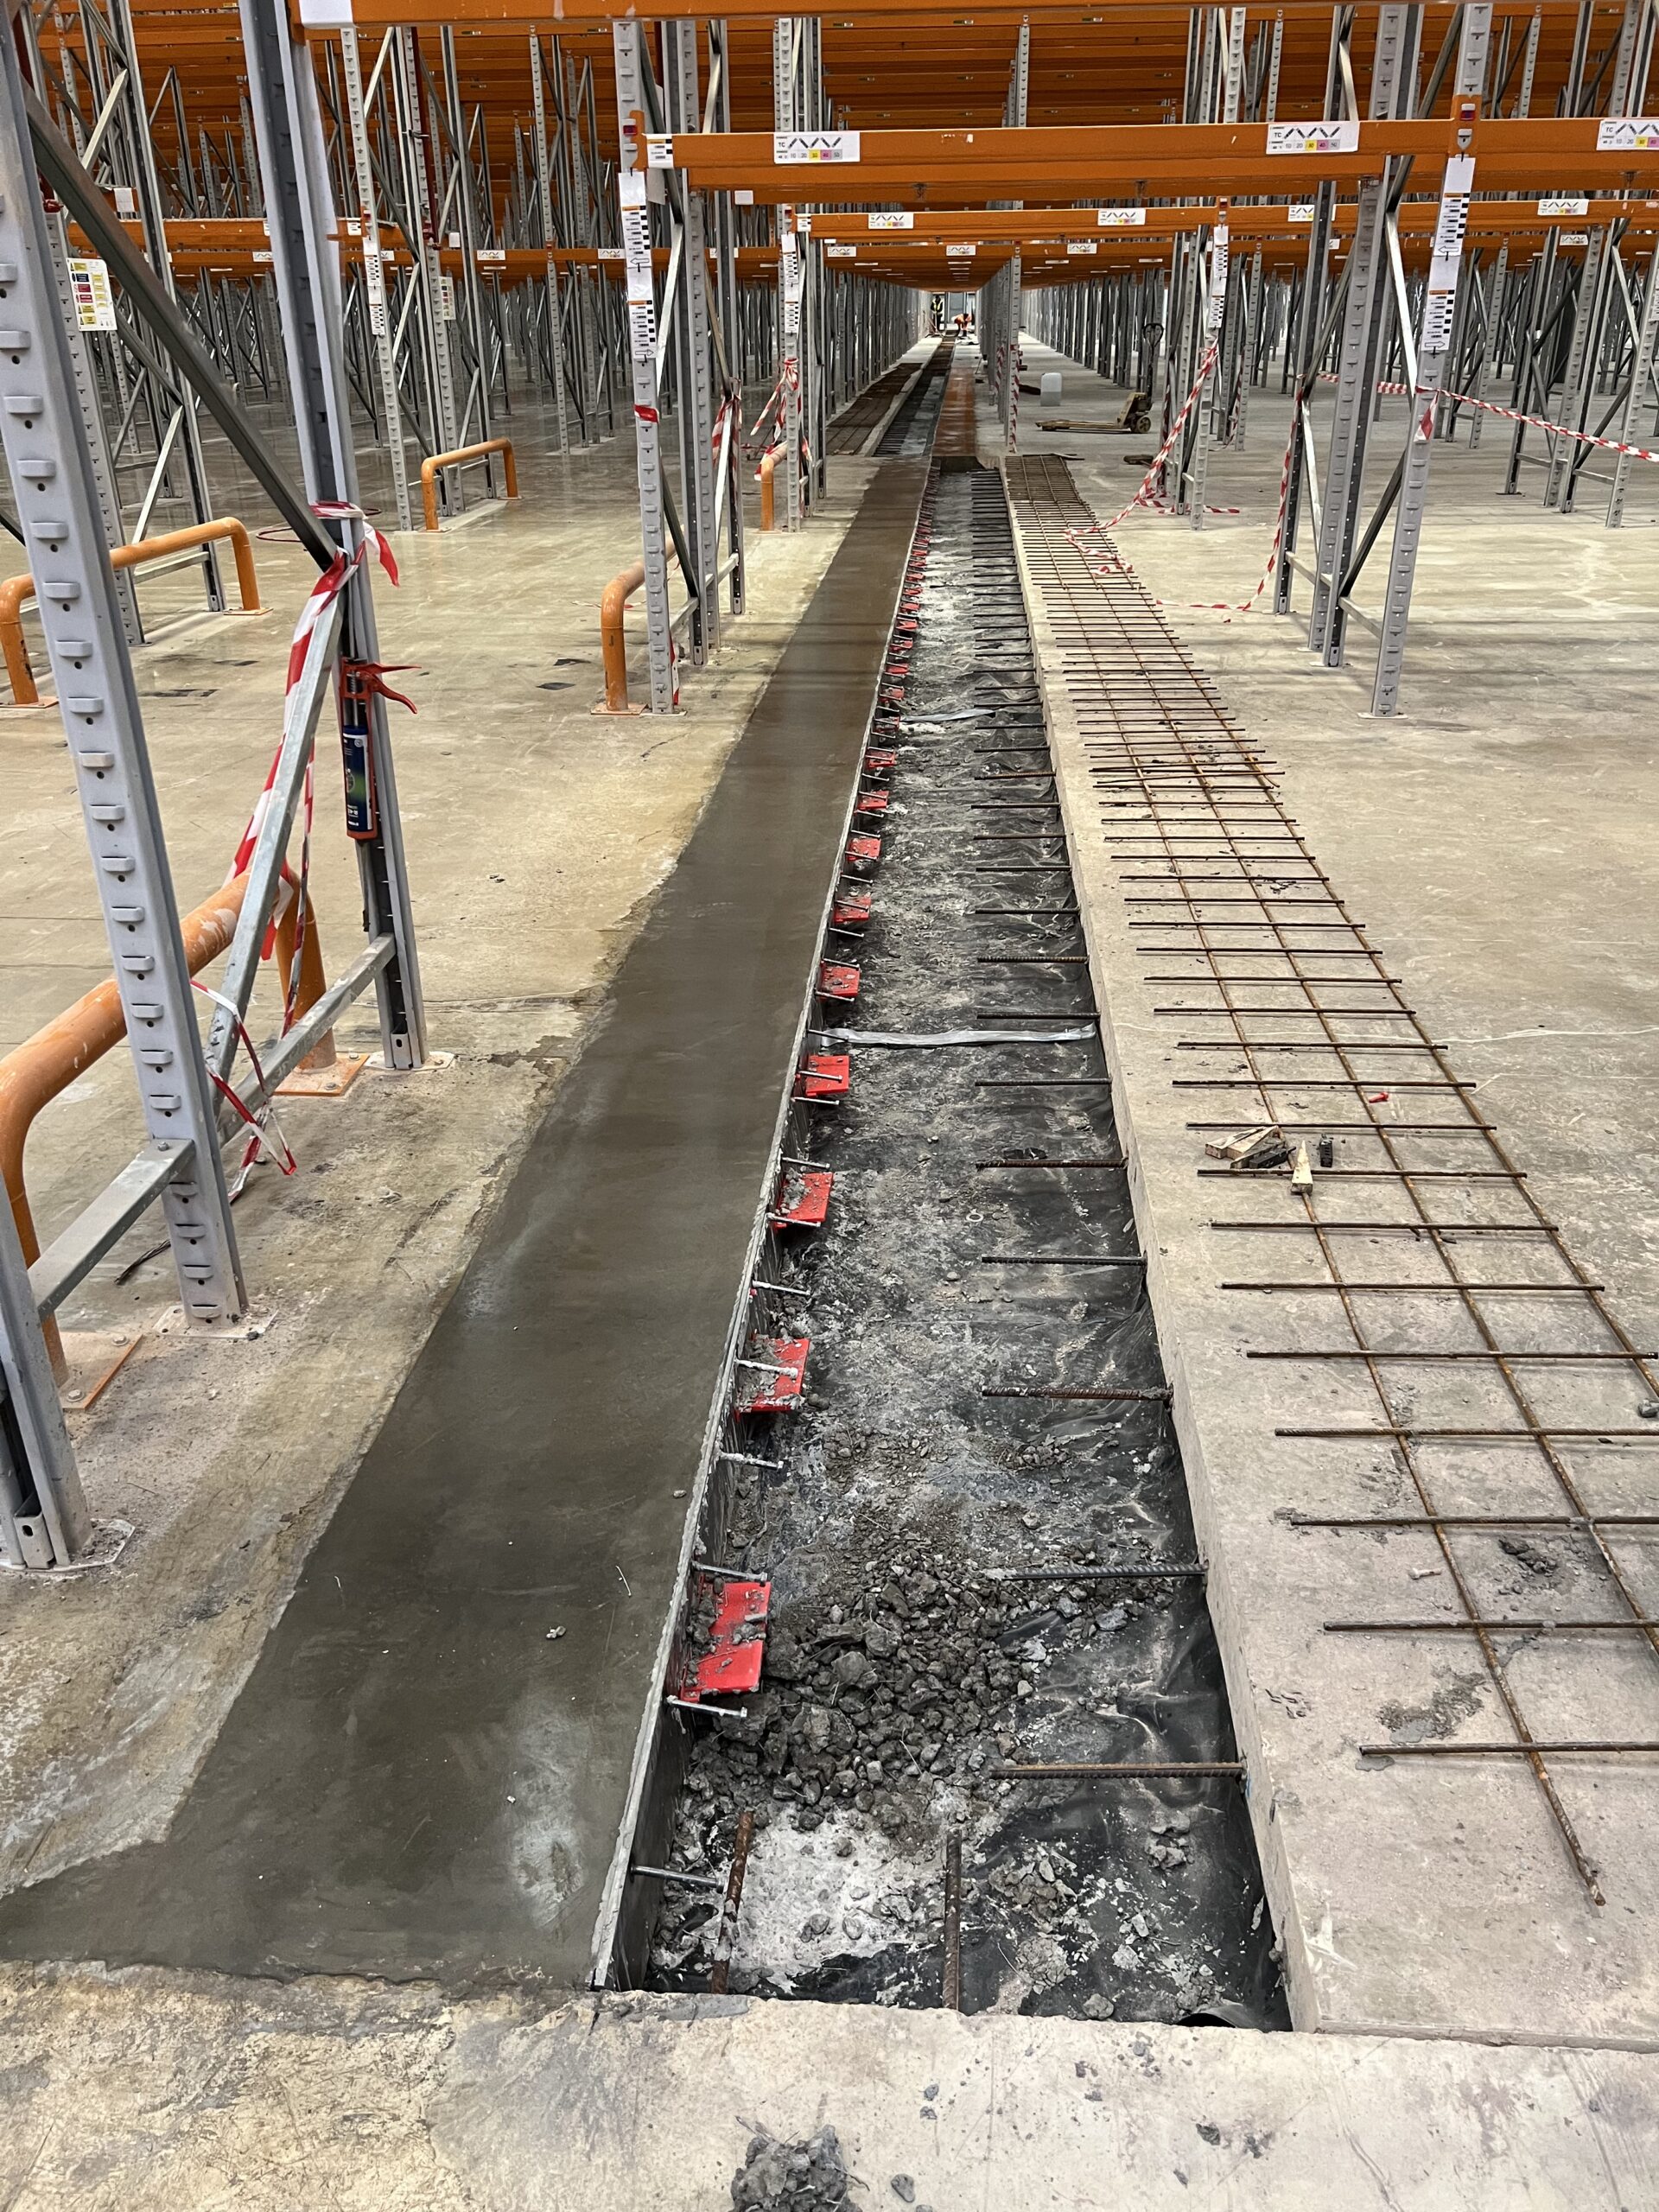 This photo is showing the new joint being installed. Concrete has been poured and power floated smooth and level to one side of the joint. The other side of the joint is poured the next day and subsequently laid level.